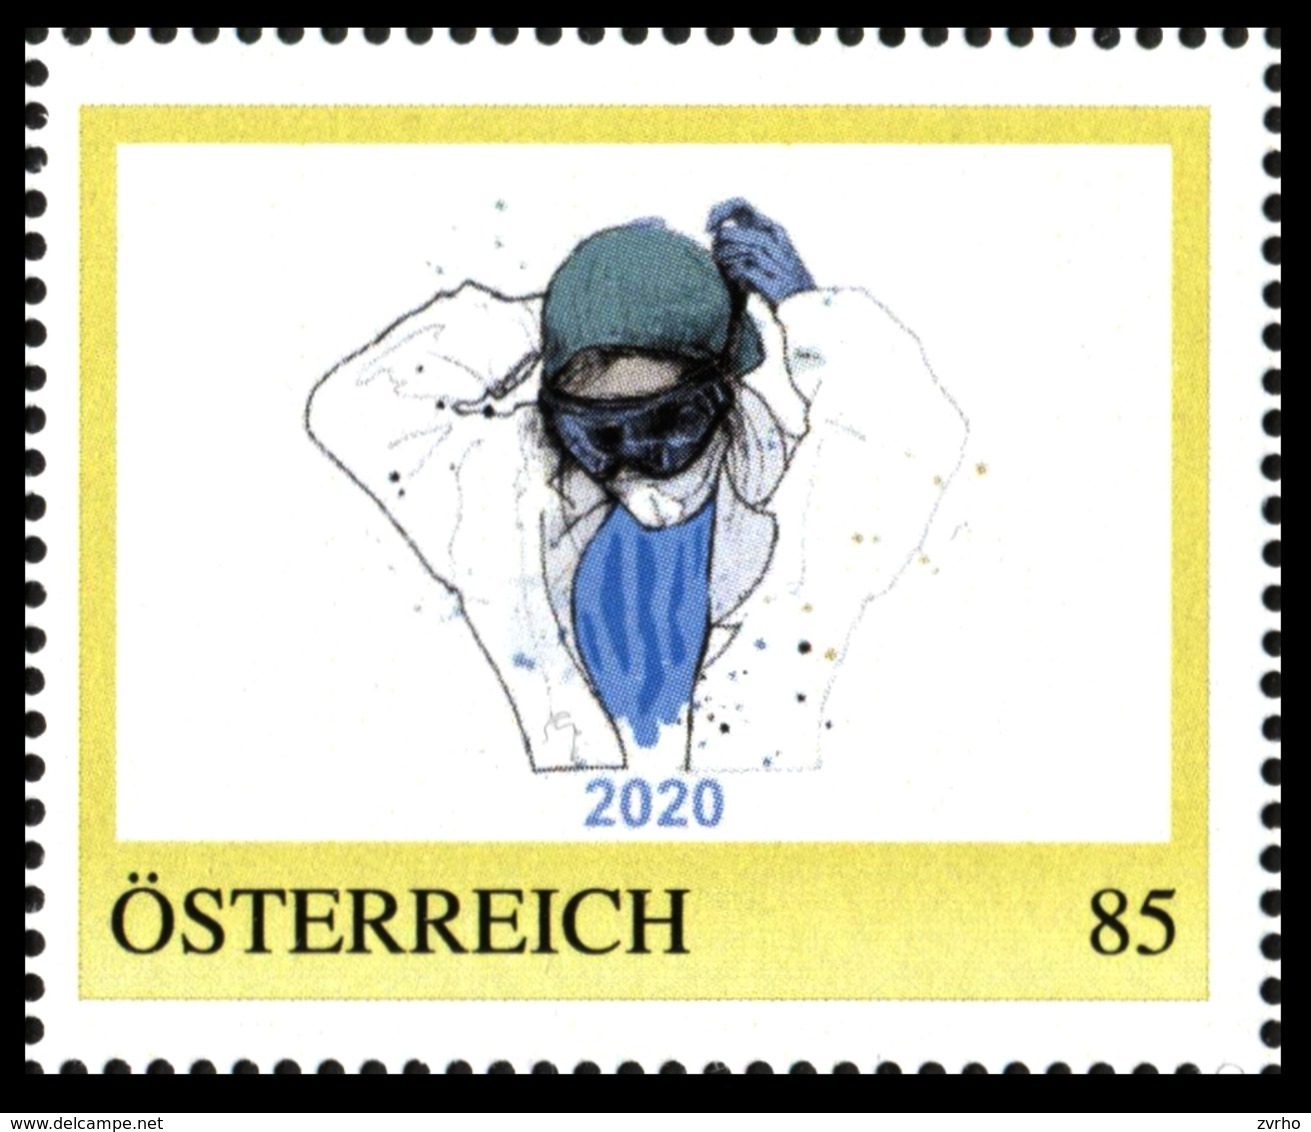 LAST PIECE !!! AUSTRIA OSTERREICH 2020 HEALTH CORONAVIRUS COVID ** PERSONAL STAMP ** MNH ** Only 20 Printed - Disease